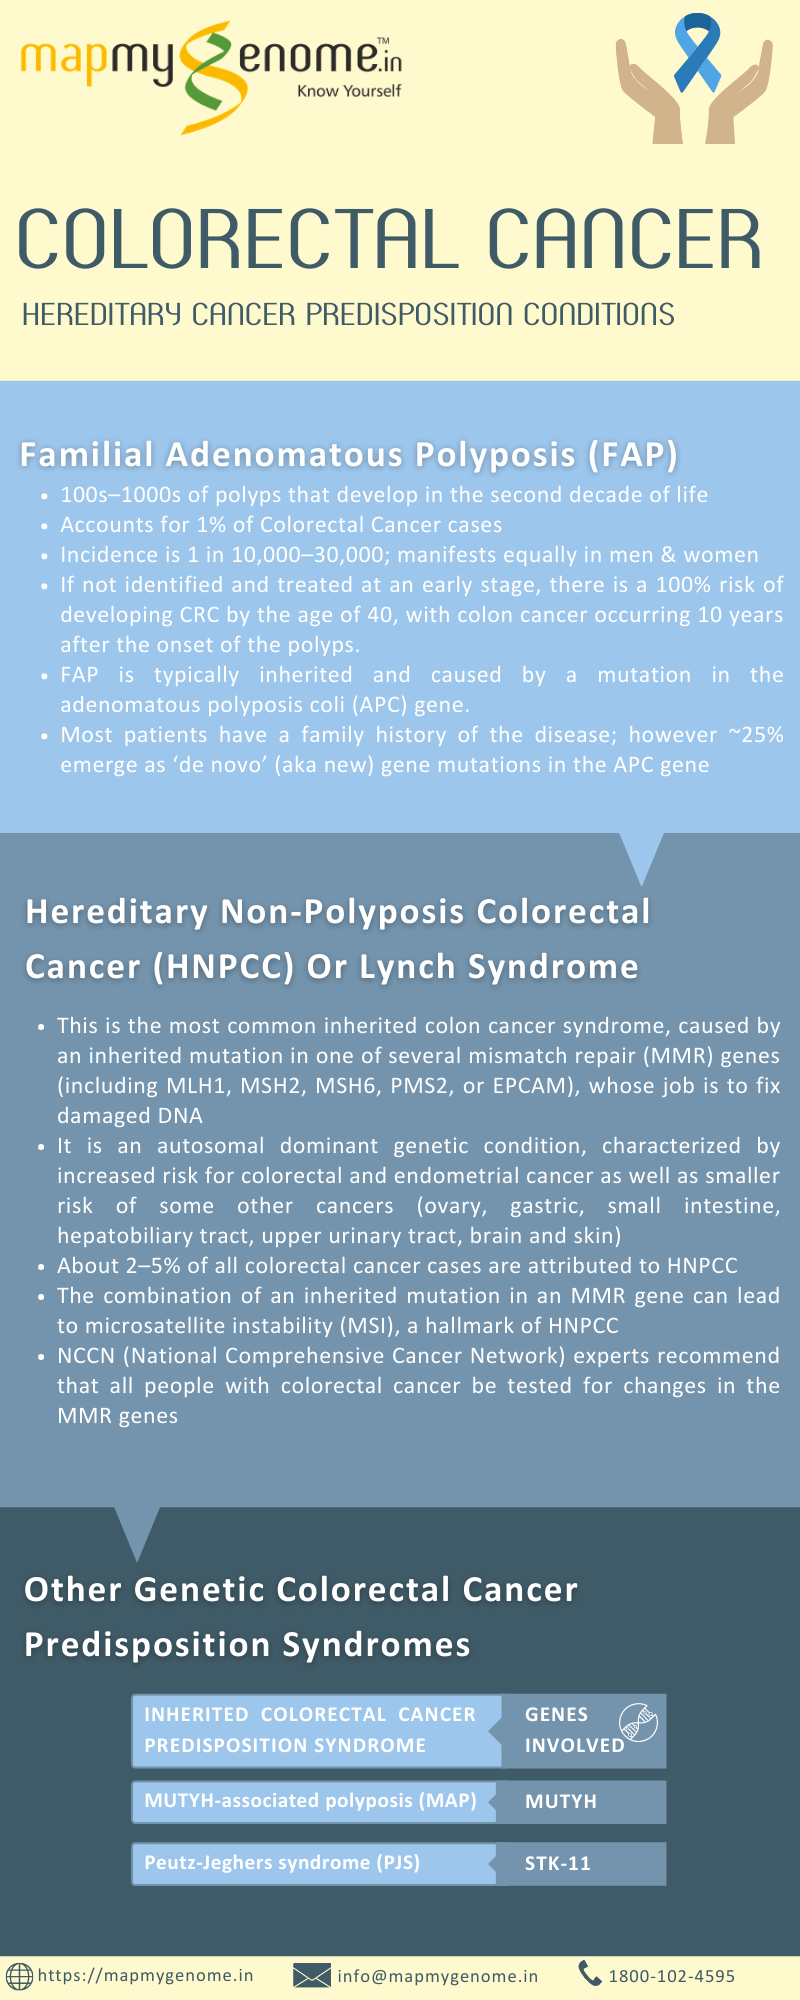 Colorectal cancer infographic